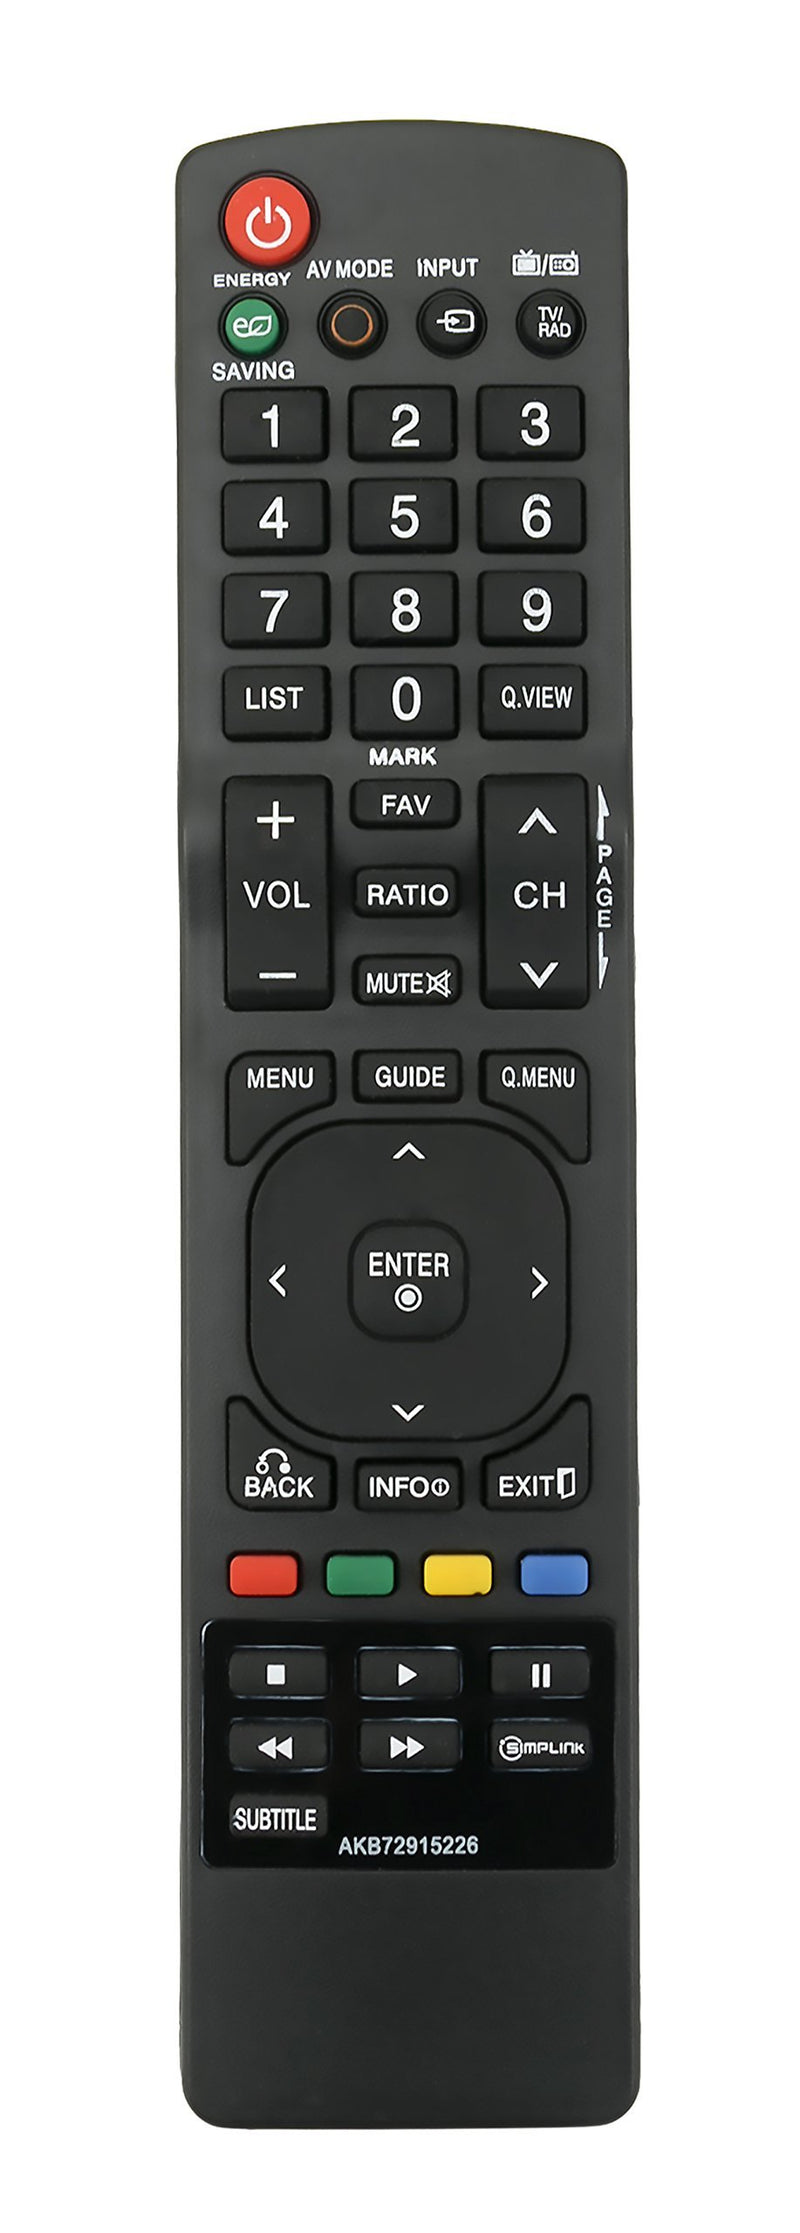 New AKB72915226 Replace Remote fit for LG TV 47LE5510 47LD650 37LM6200 50PV400 50PK550 32LM6200 MKJ40653805 32LG60UR 42LG60FR 42LG60F 47LG60FR LN46A650A1H 32LG60UR 32LE4500 42PJ550 22LD350 42LE4500